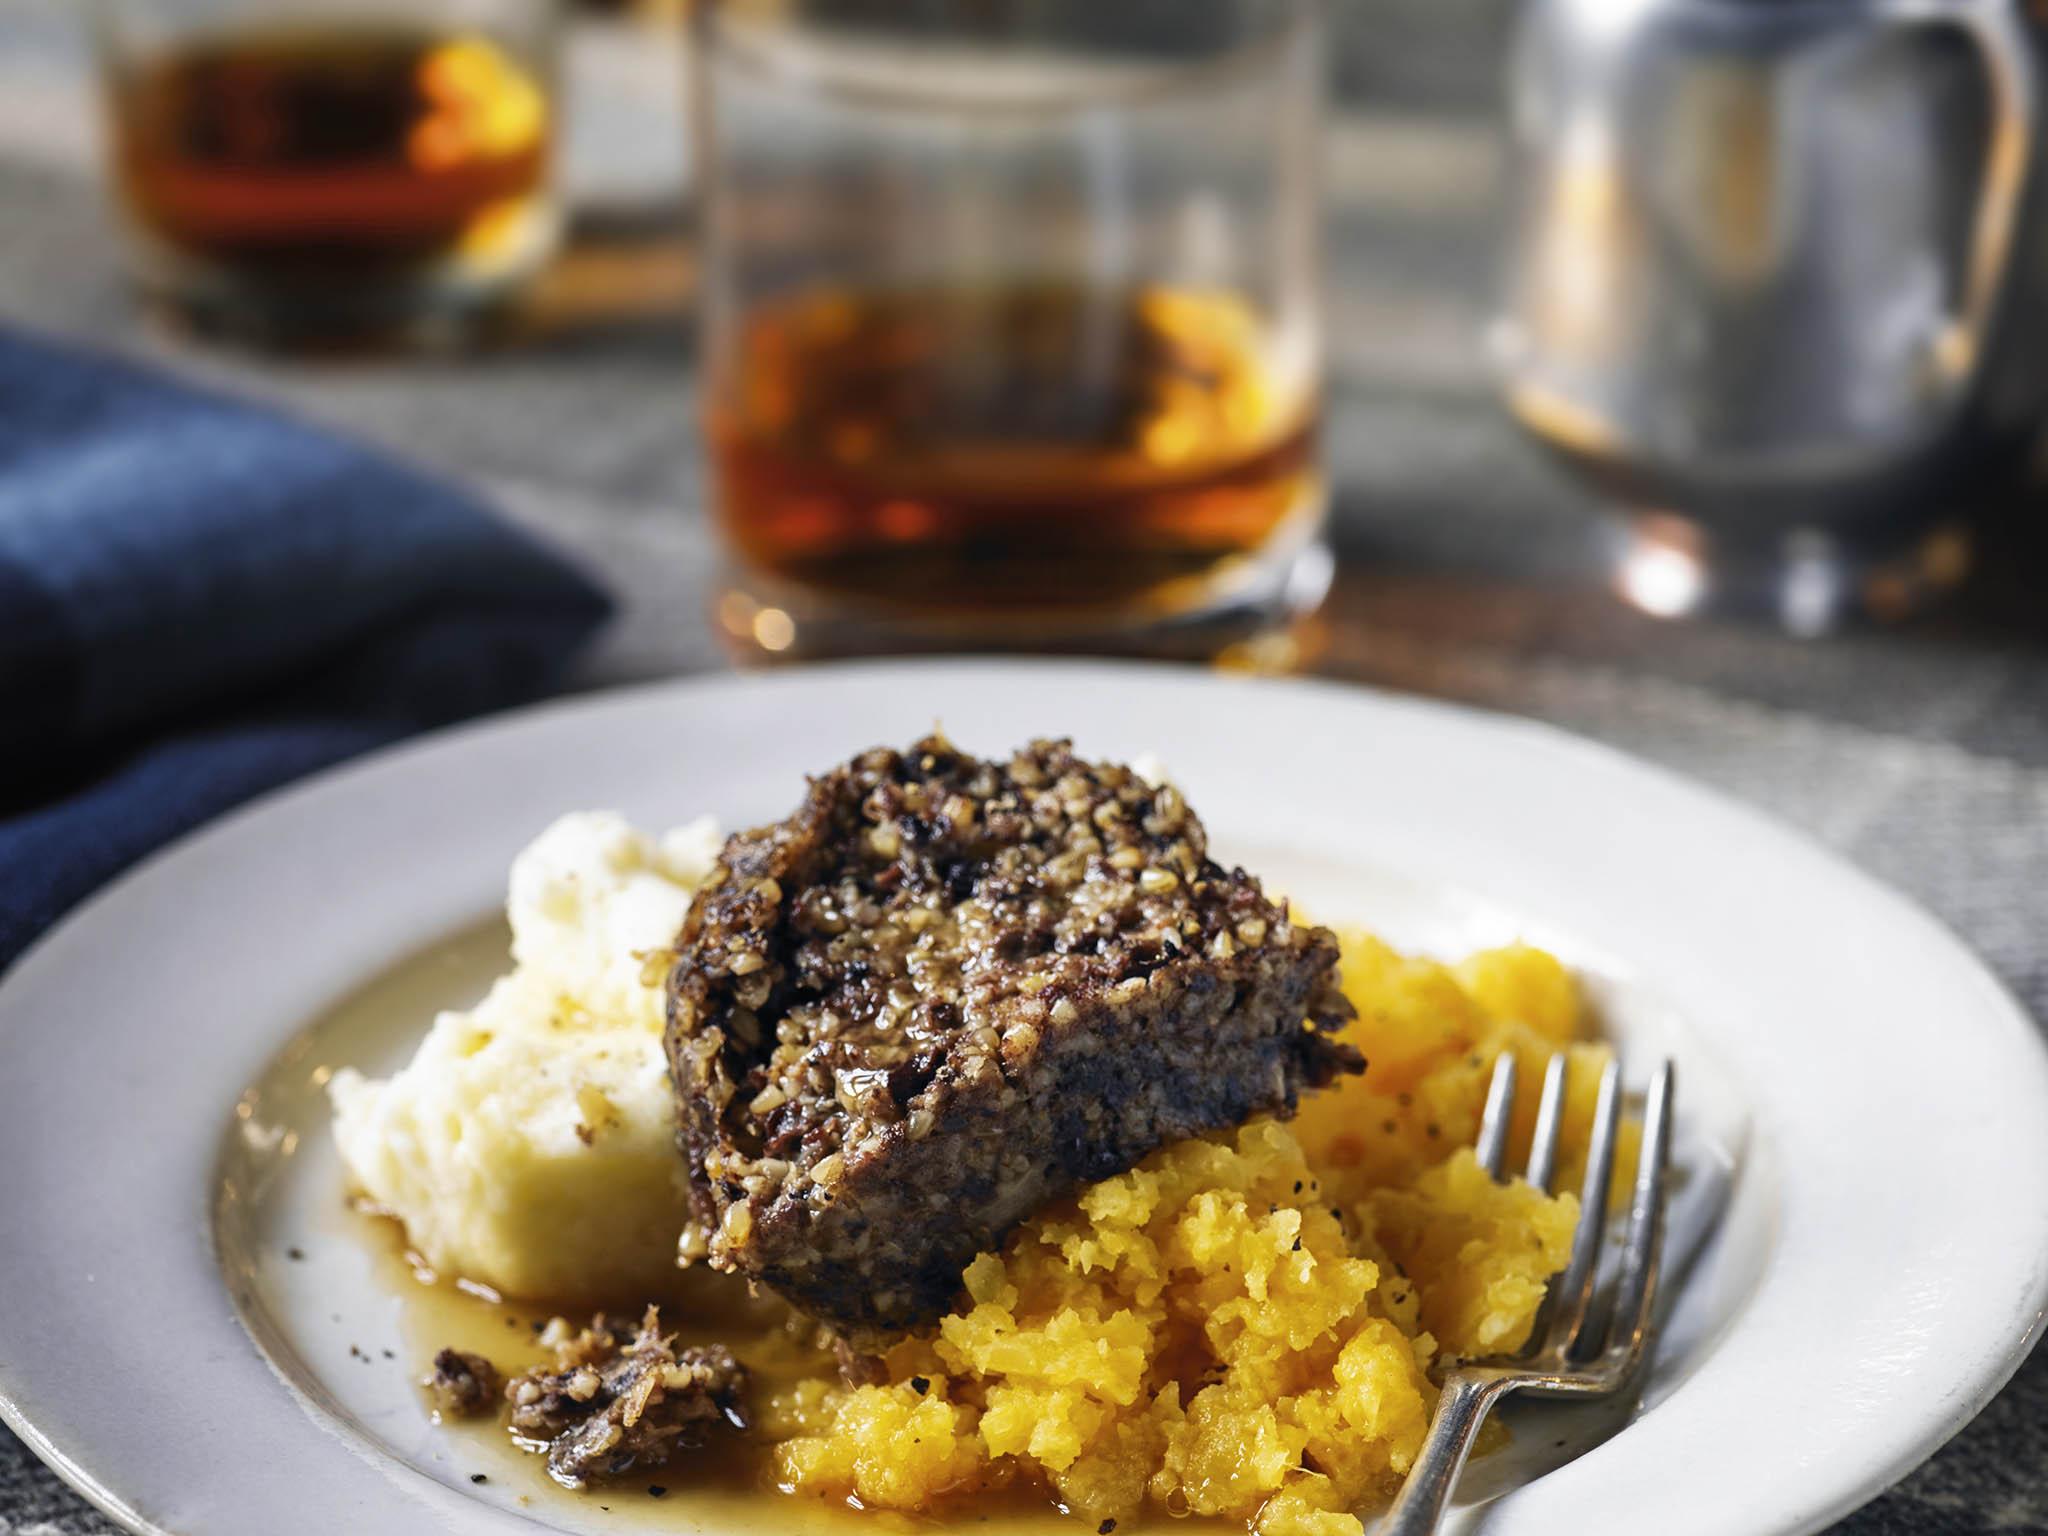 The main event: haggis is served with a dram of single malt whisky